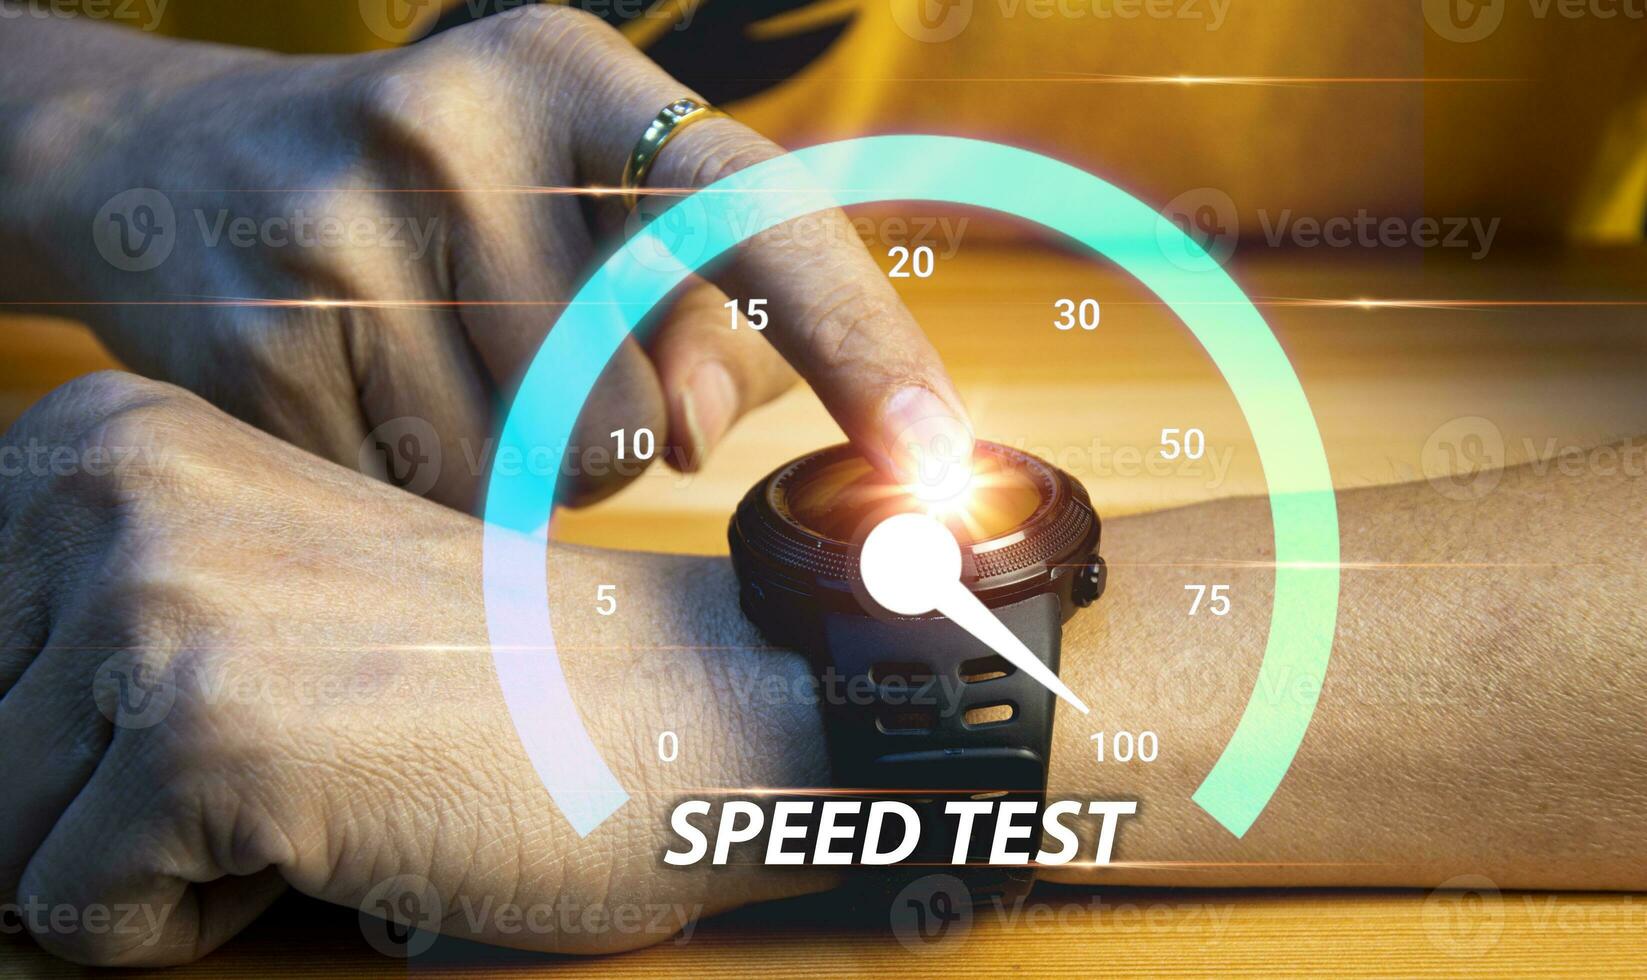 fast internet connection speedtest network bandwidth technology Man using high speed internet with smartphone and laptop computer. 5G quality, speed optimization. photo